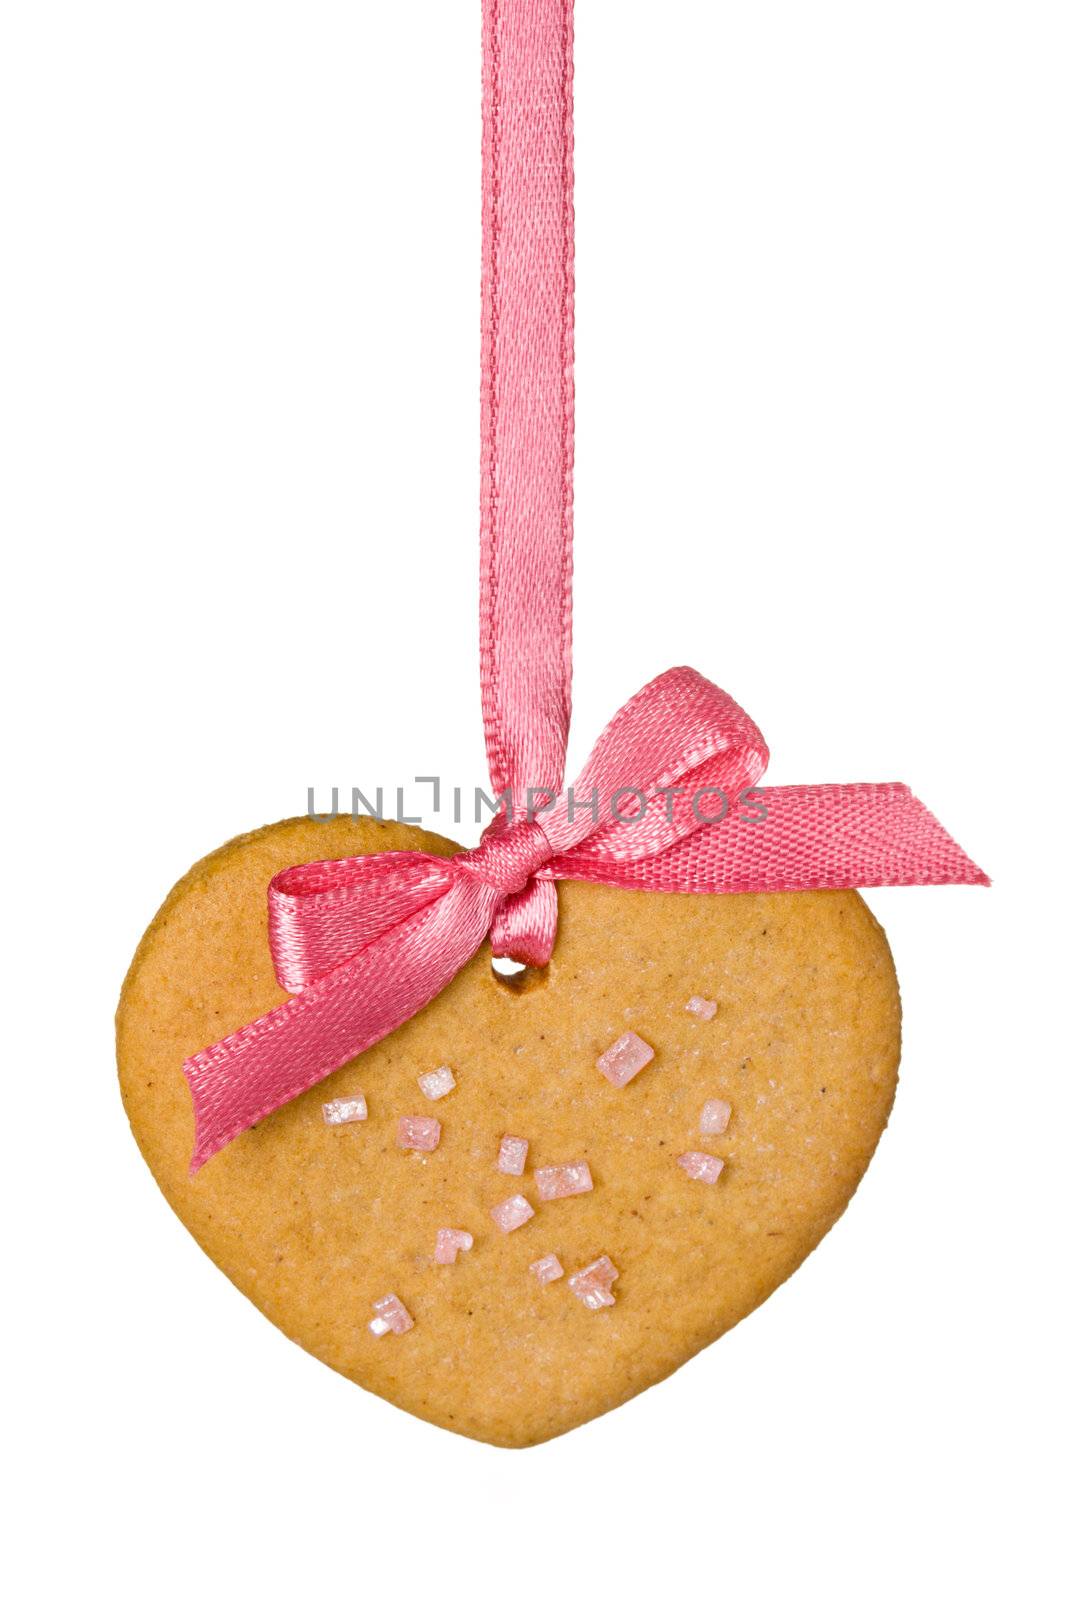 Gingerbread heart tied with a pink ribbon